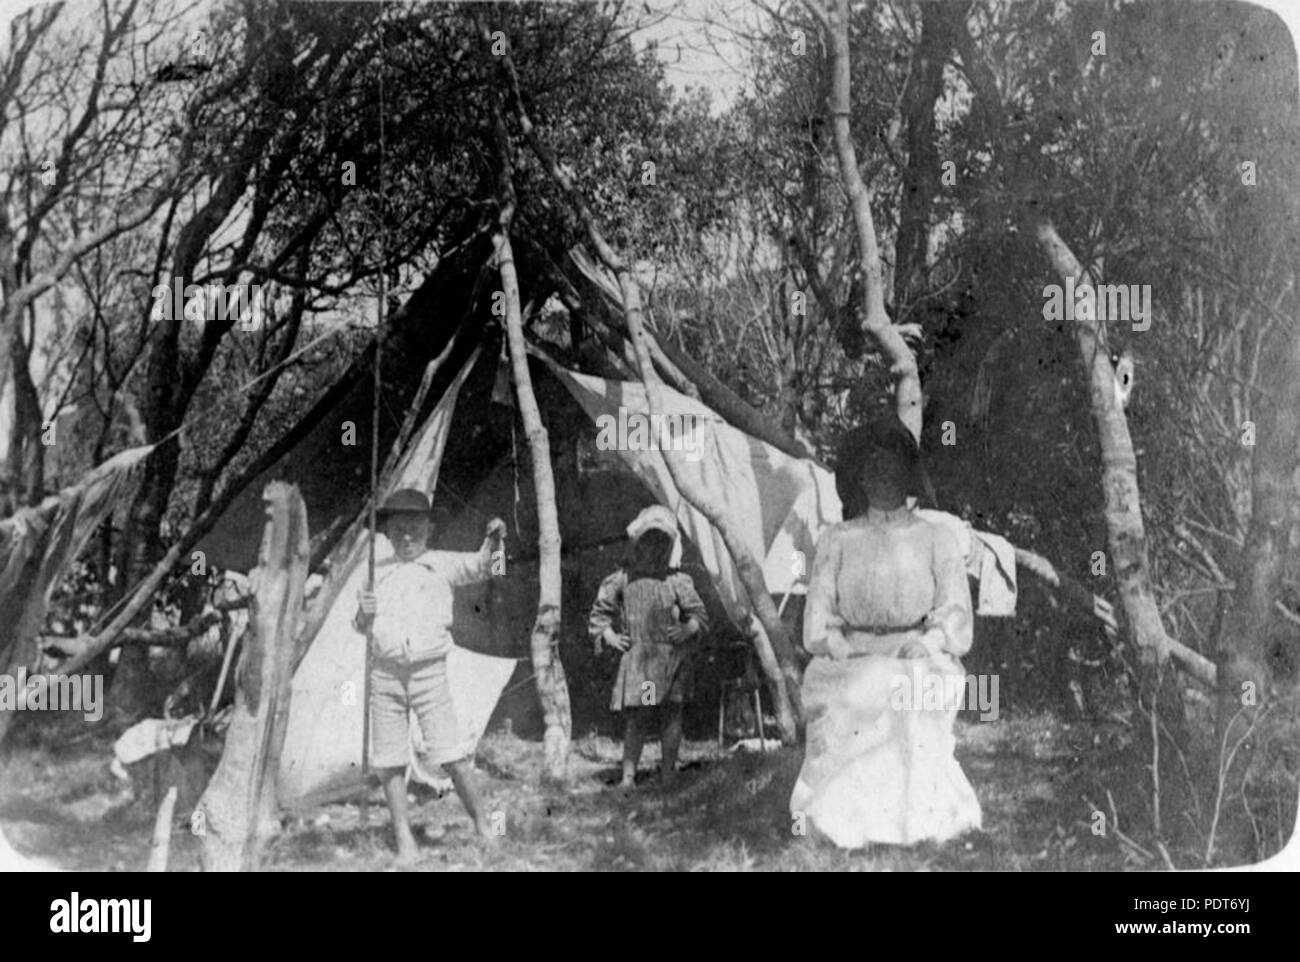 237 StateLibQld 1 166435 Family camping at Tweed River, New South Wales, 1905 Stock Photo